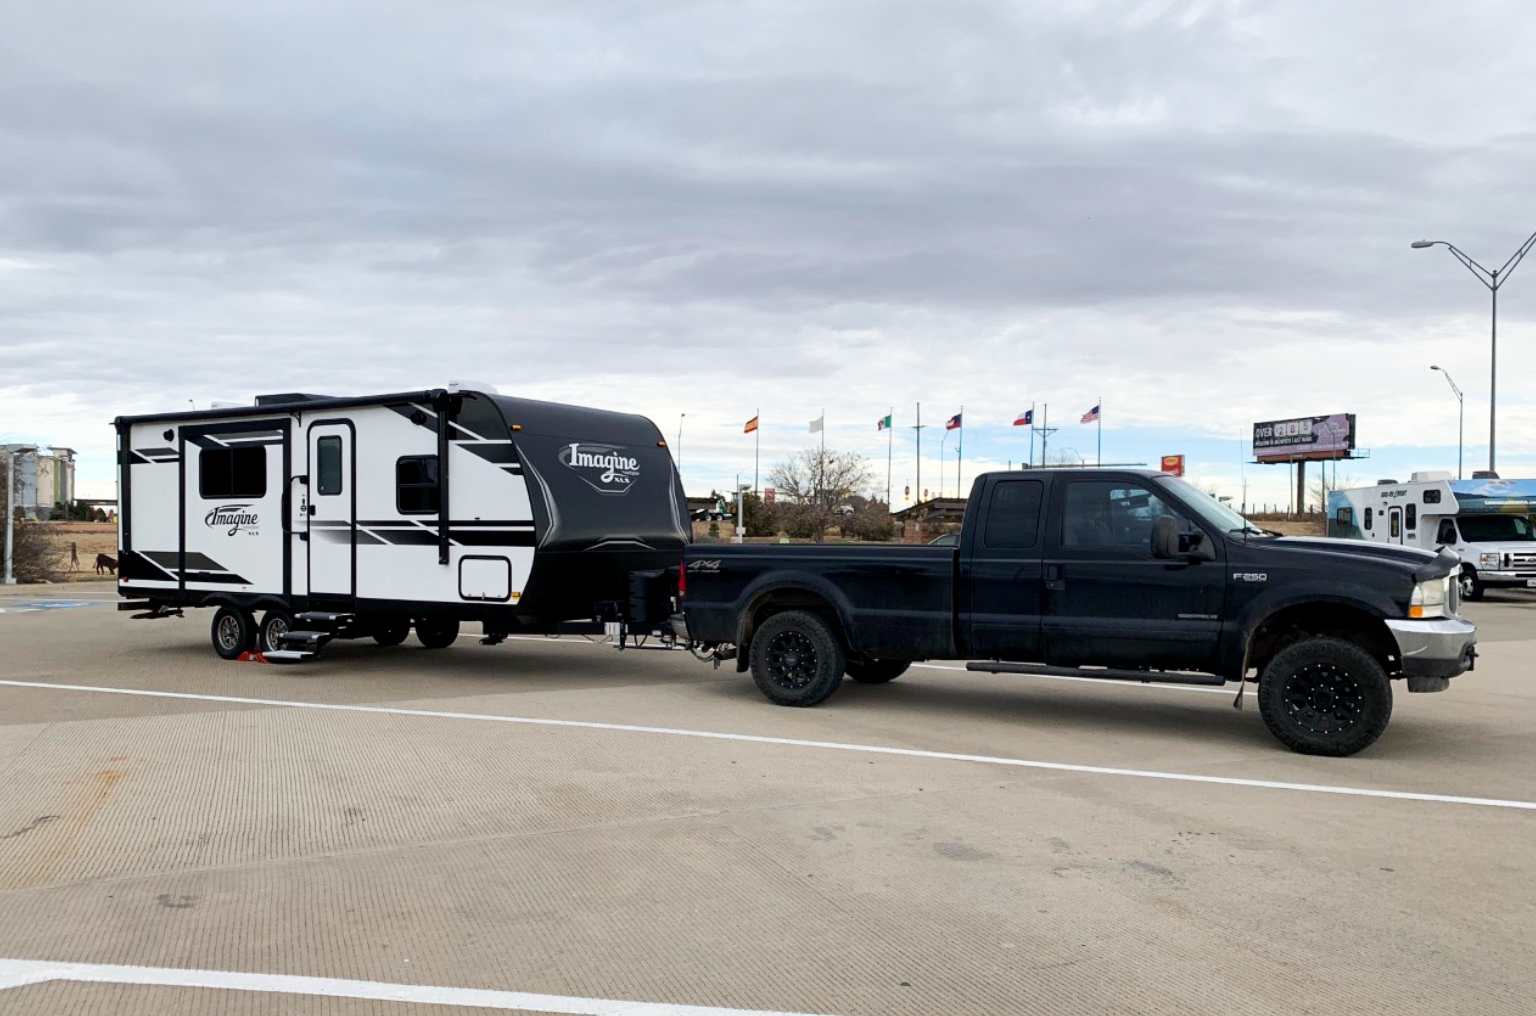 Black truck towing a travel trailer parked at a rest stop.